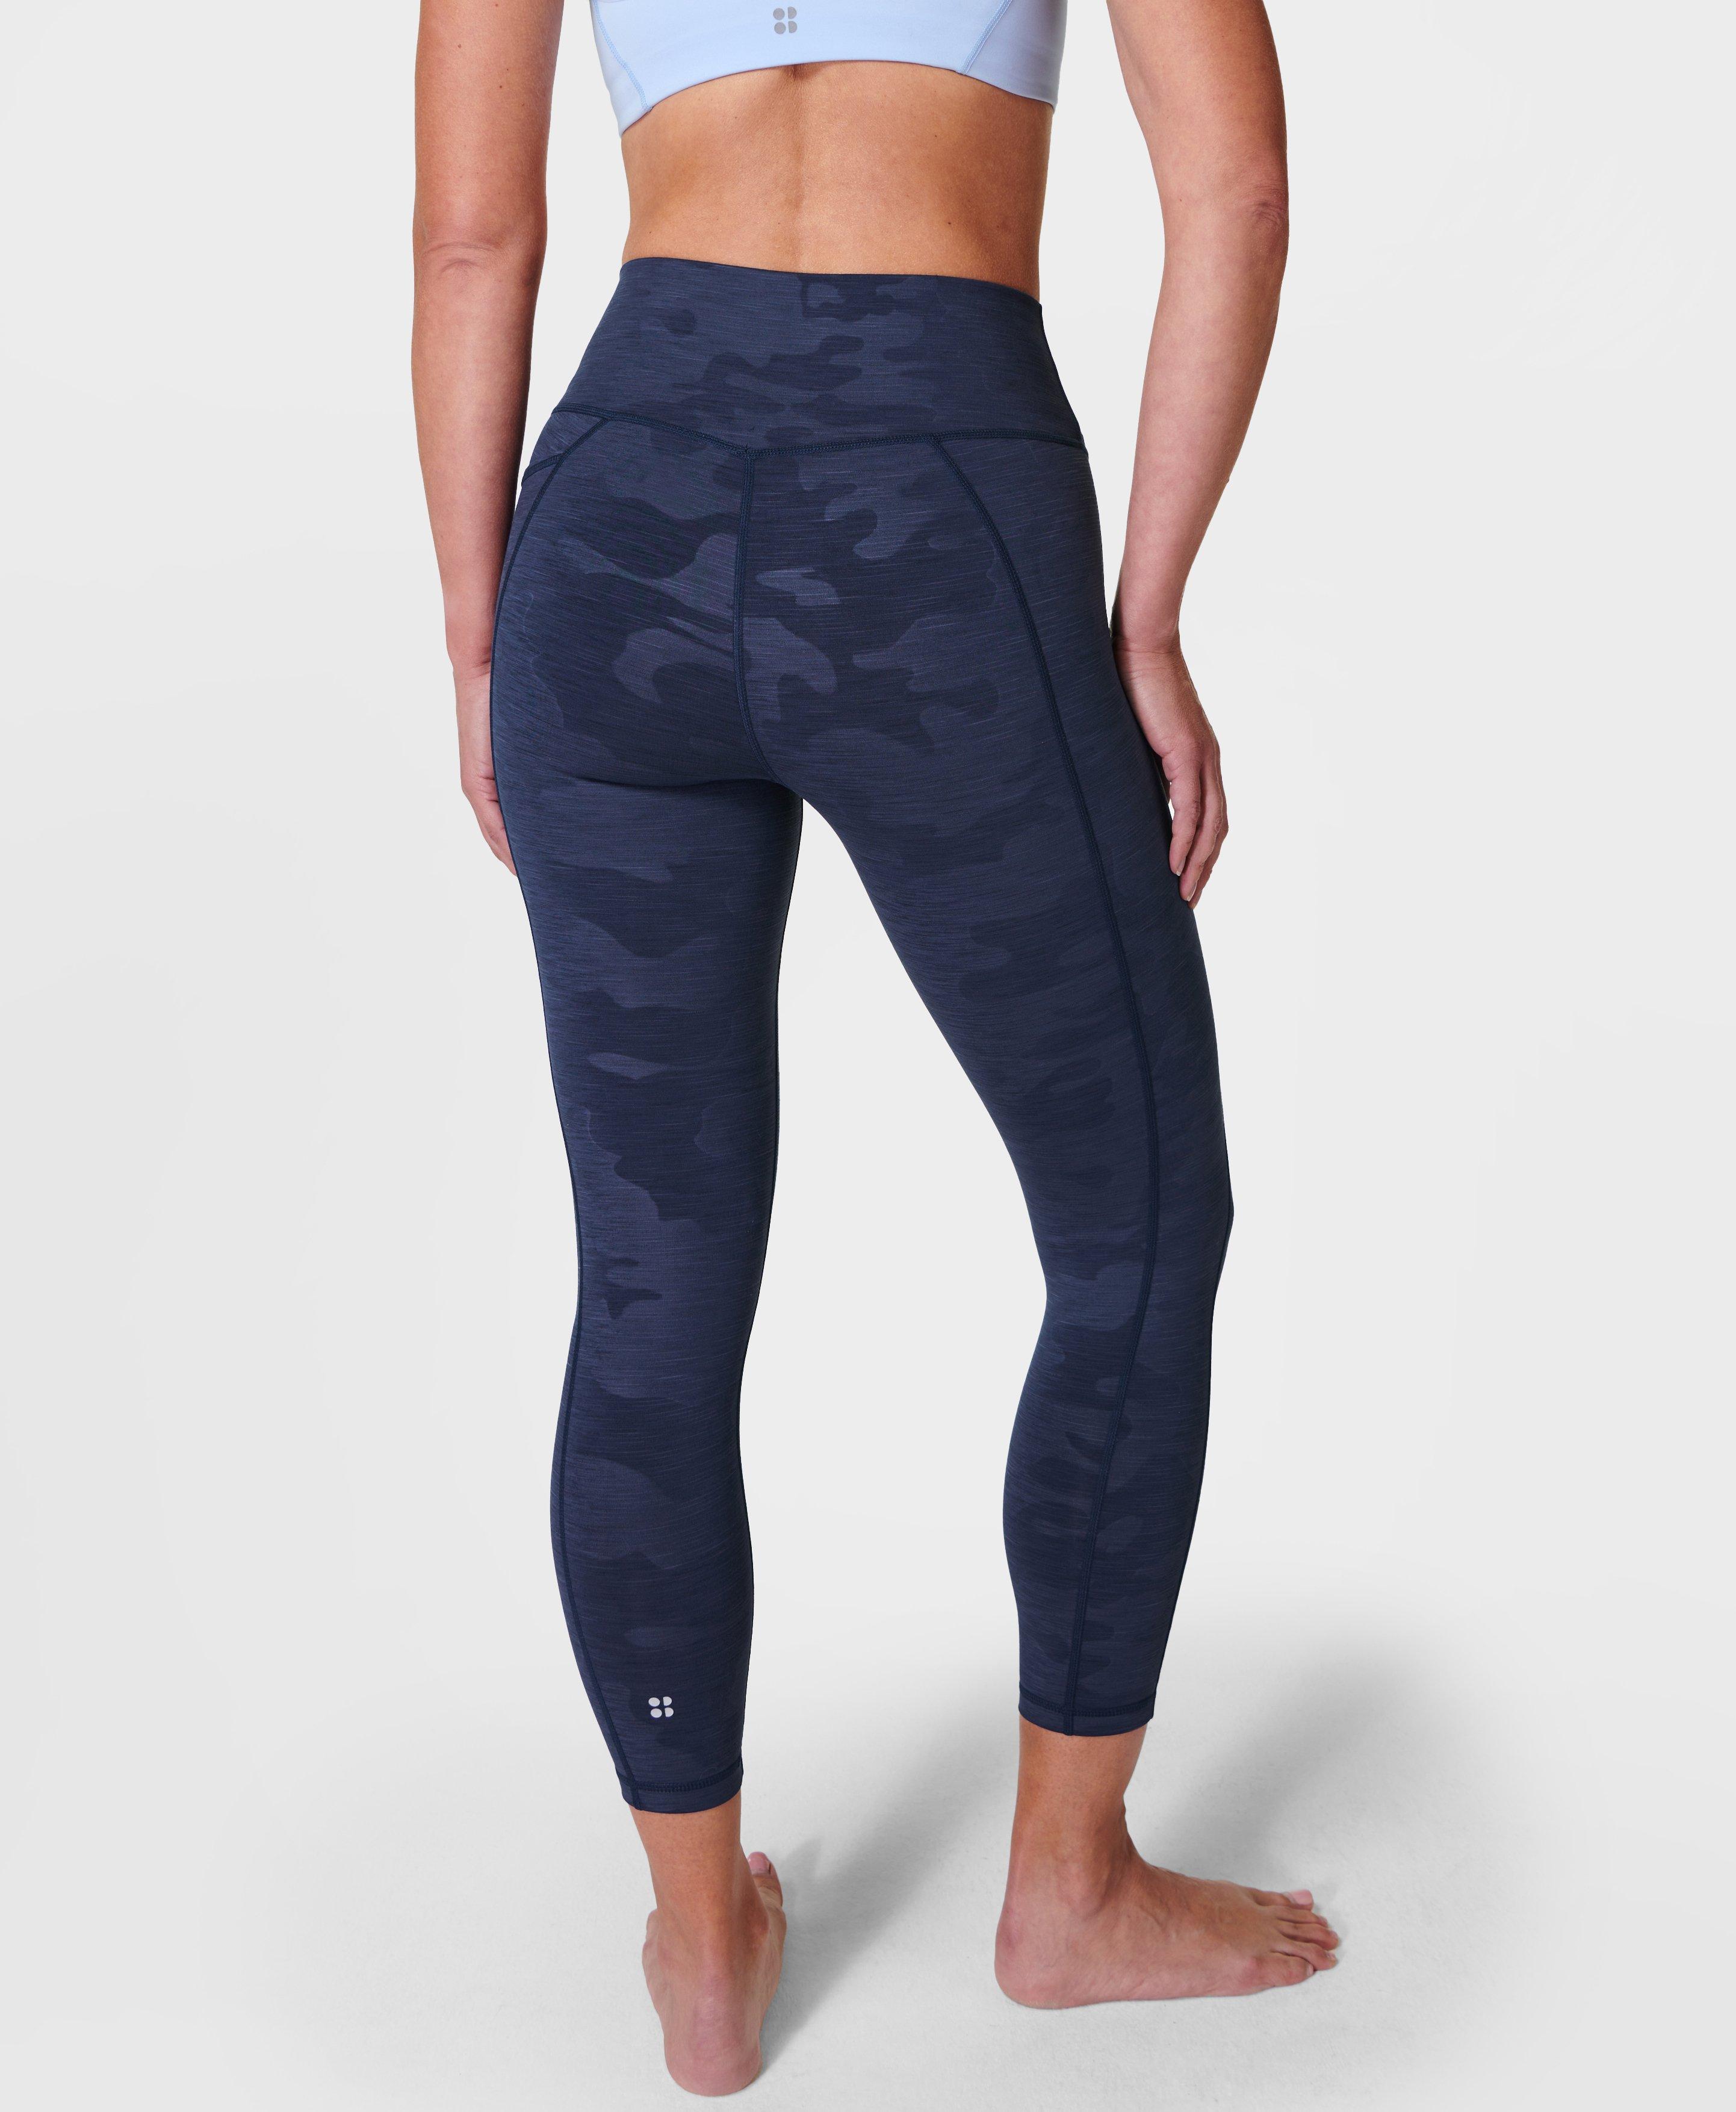 Sweaty Betty Silhouette Sculpt Seamless Workout Leggings, Reef Teal/Navy  Blue at John Lewis & Partners